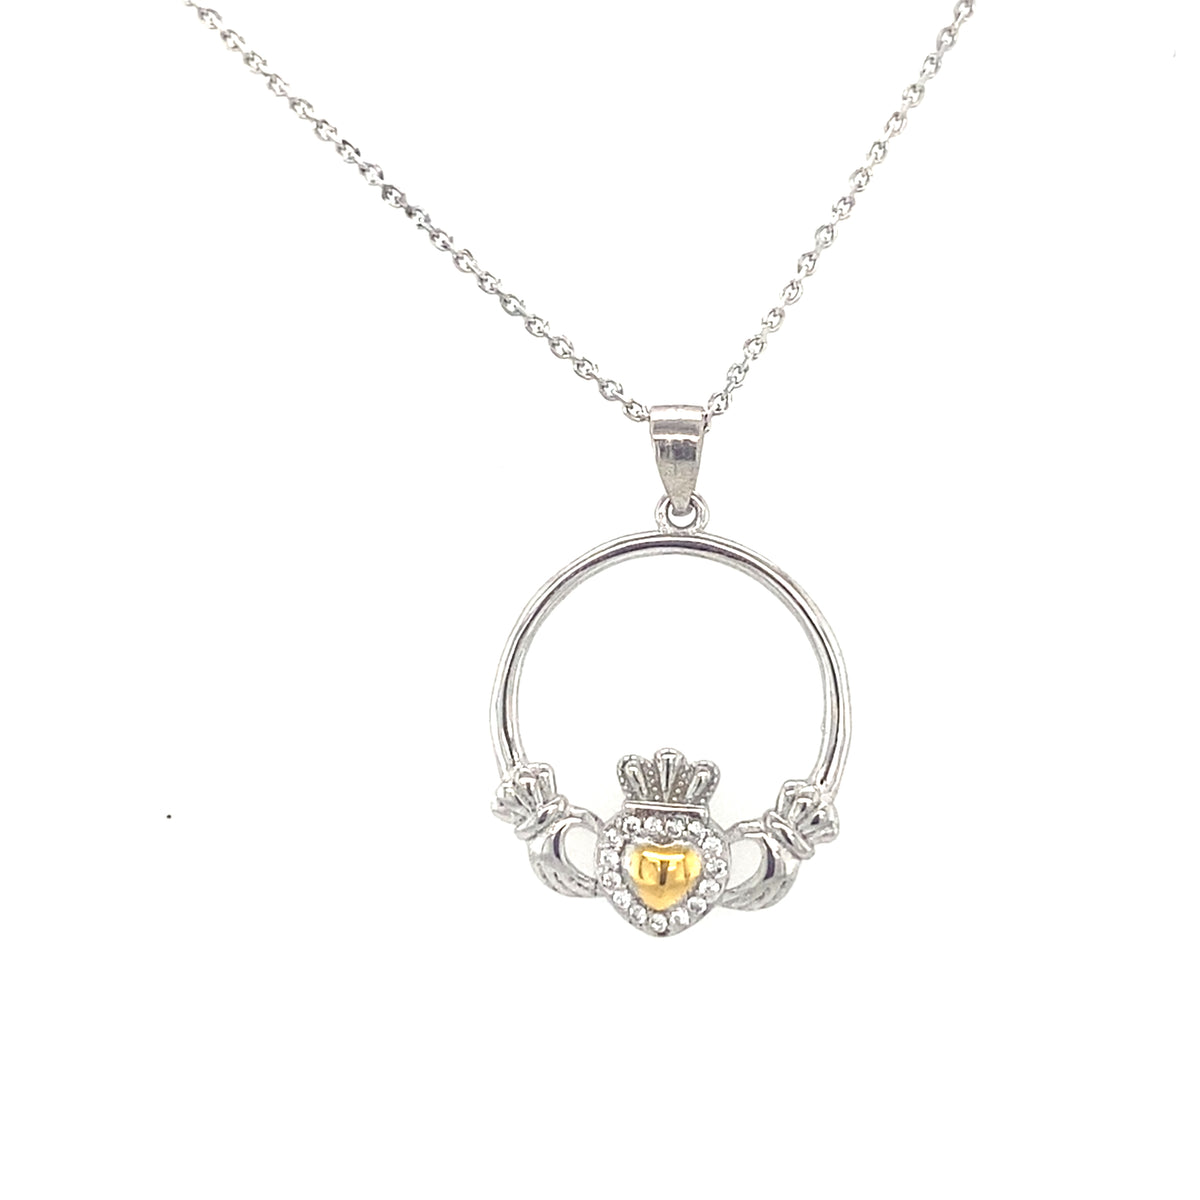 Sterling Silver Claddagh Pendant with gold heart centre